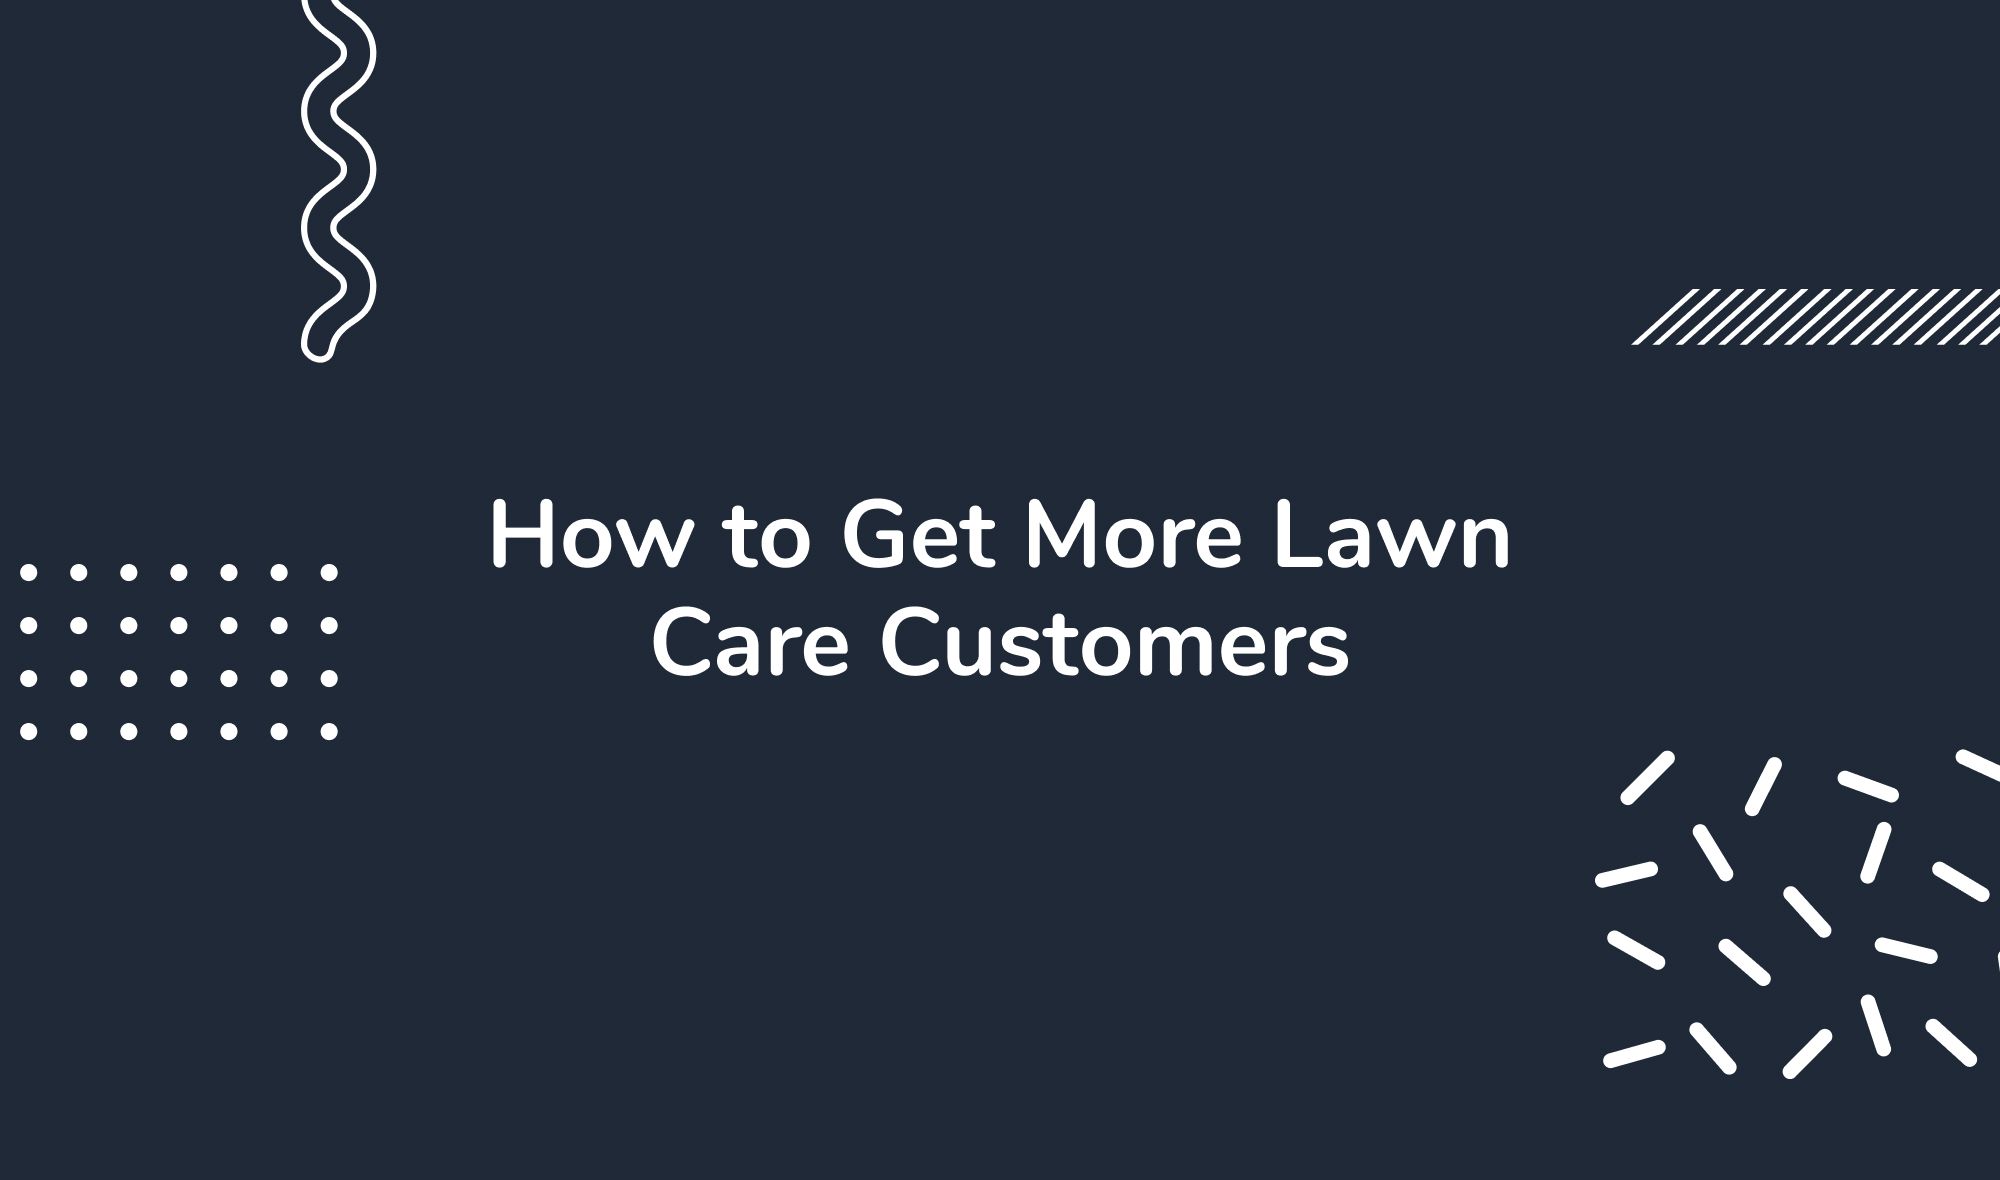 How to Get More Lawn Care Customers